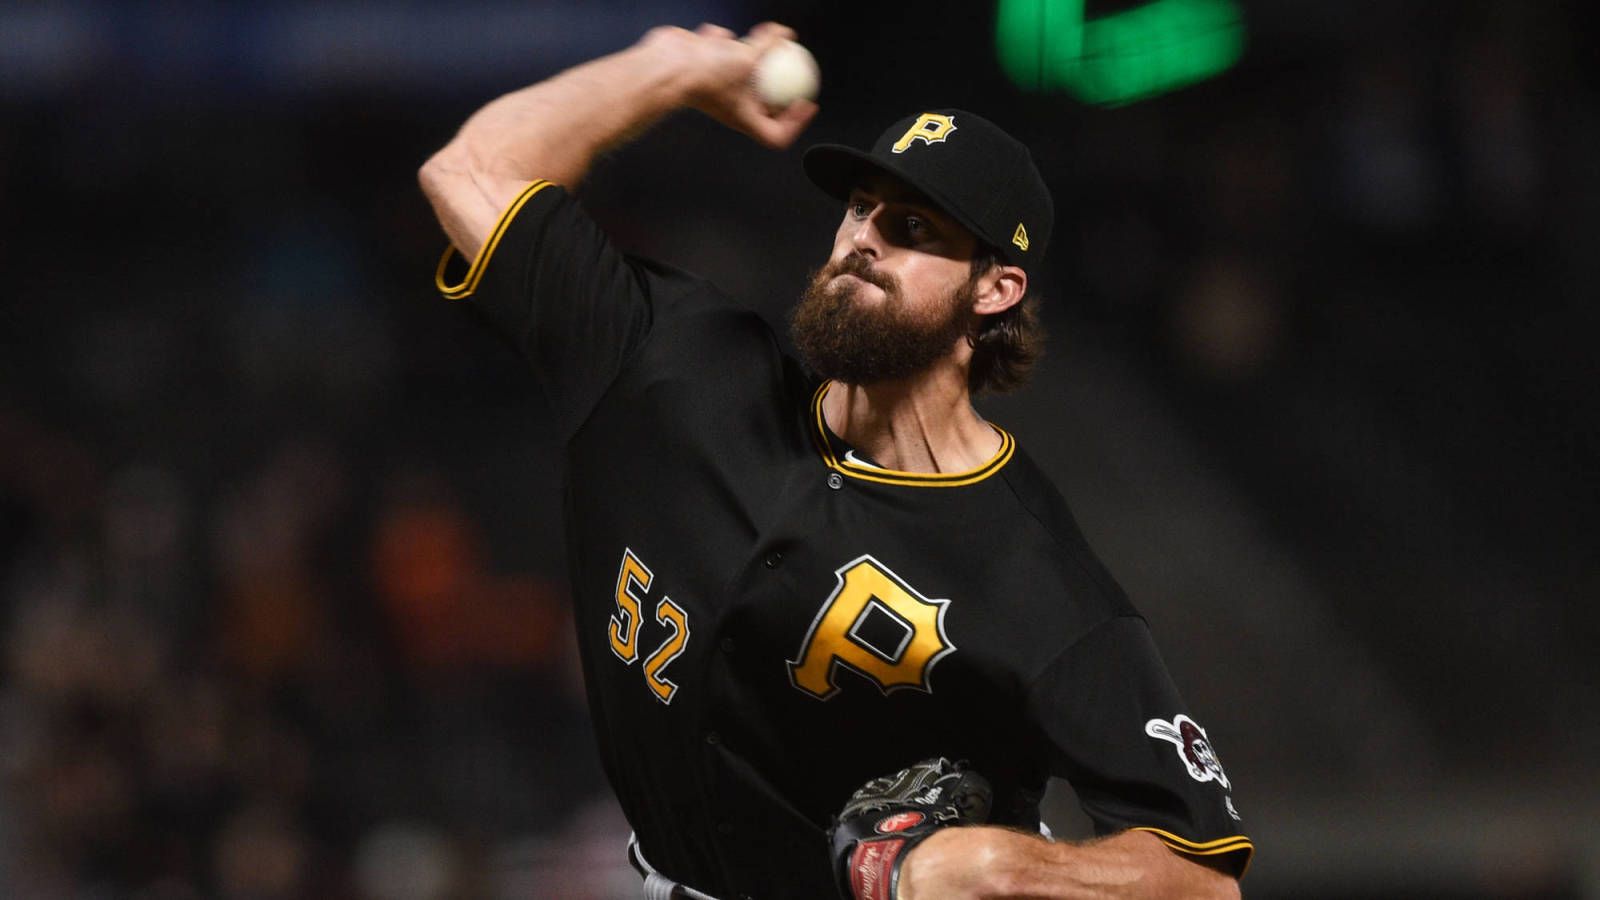 Clay Holmes continuing to learn during rehab time at Pirate City